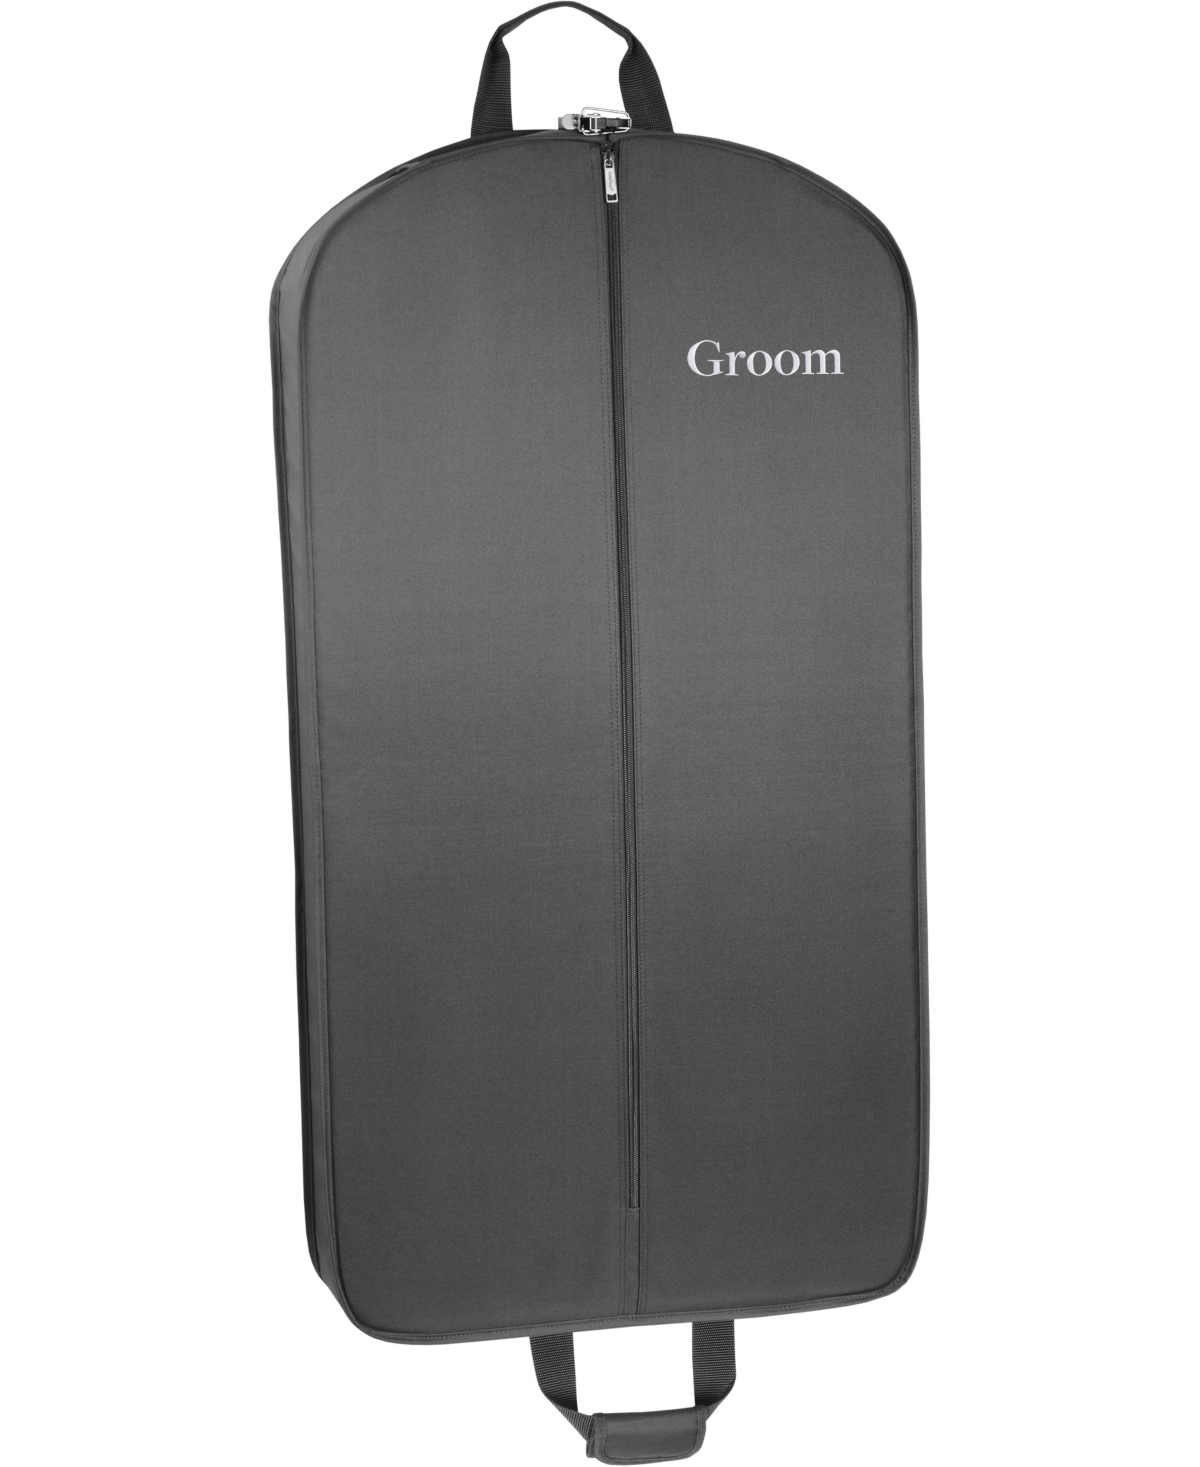 40" Deluxe Travel Garment Bag with Two Pockets and Groom Embroidery - Black - G